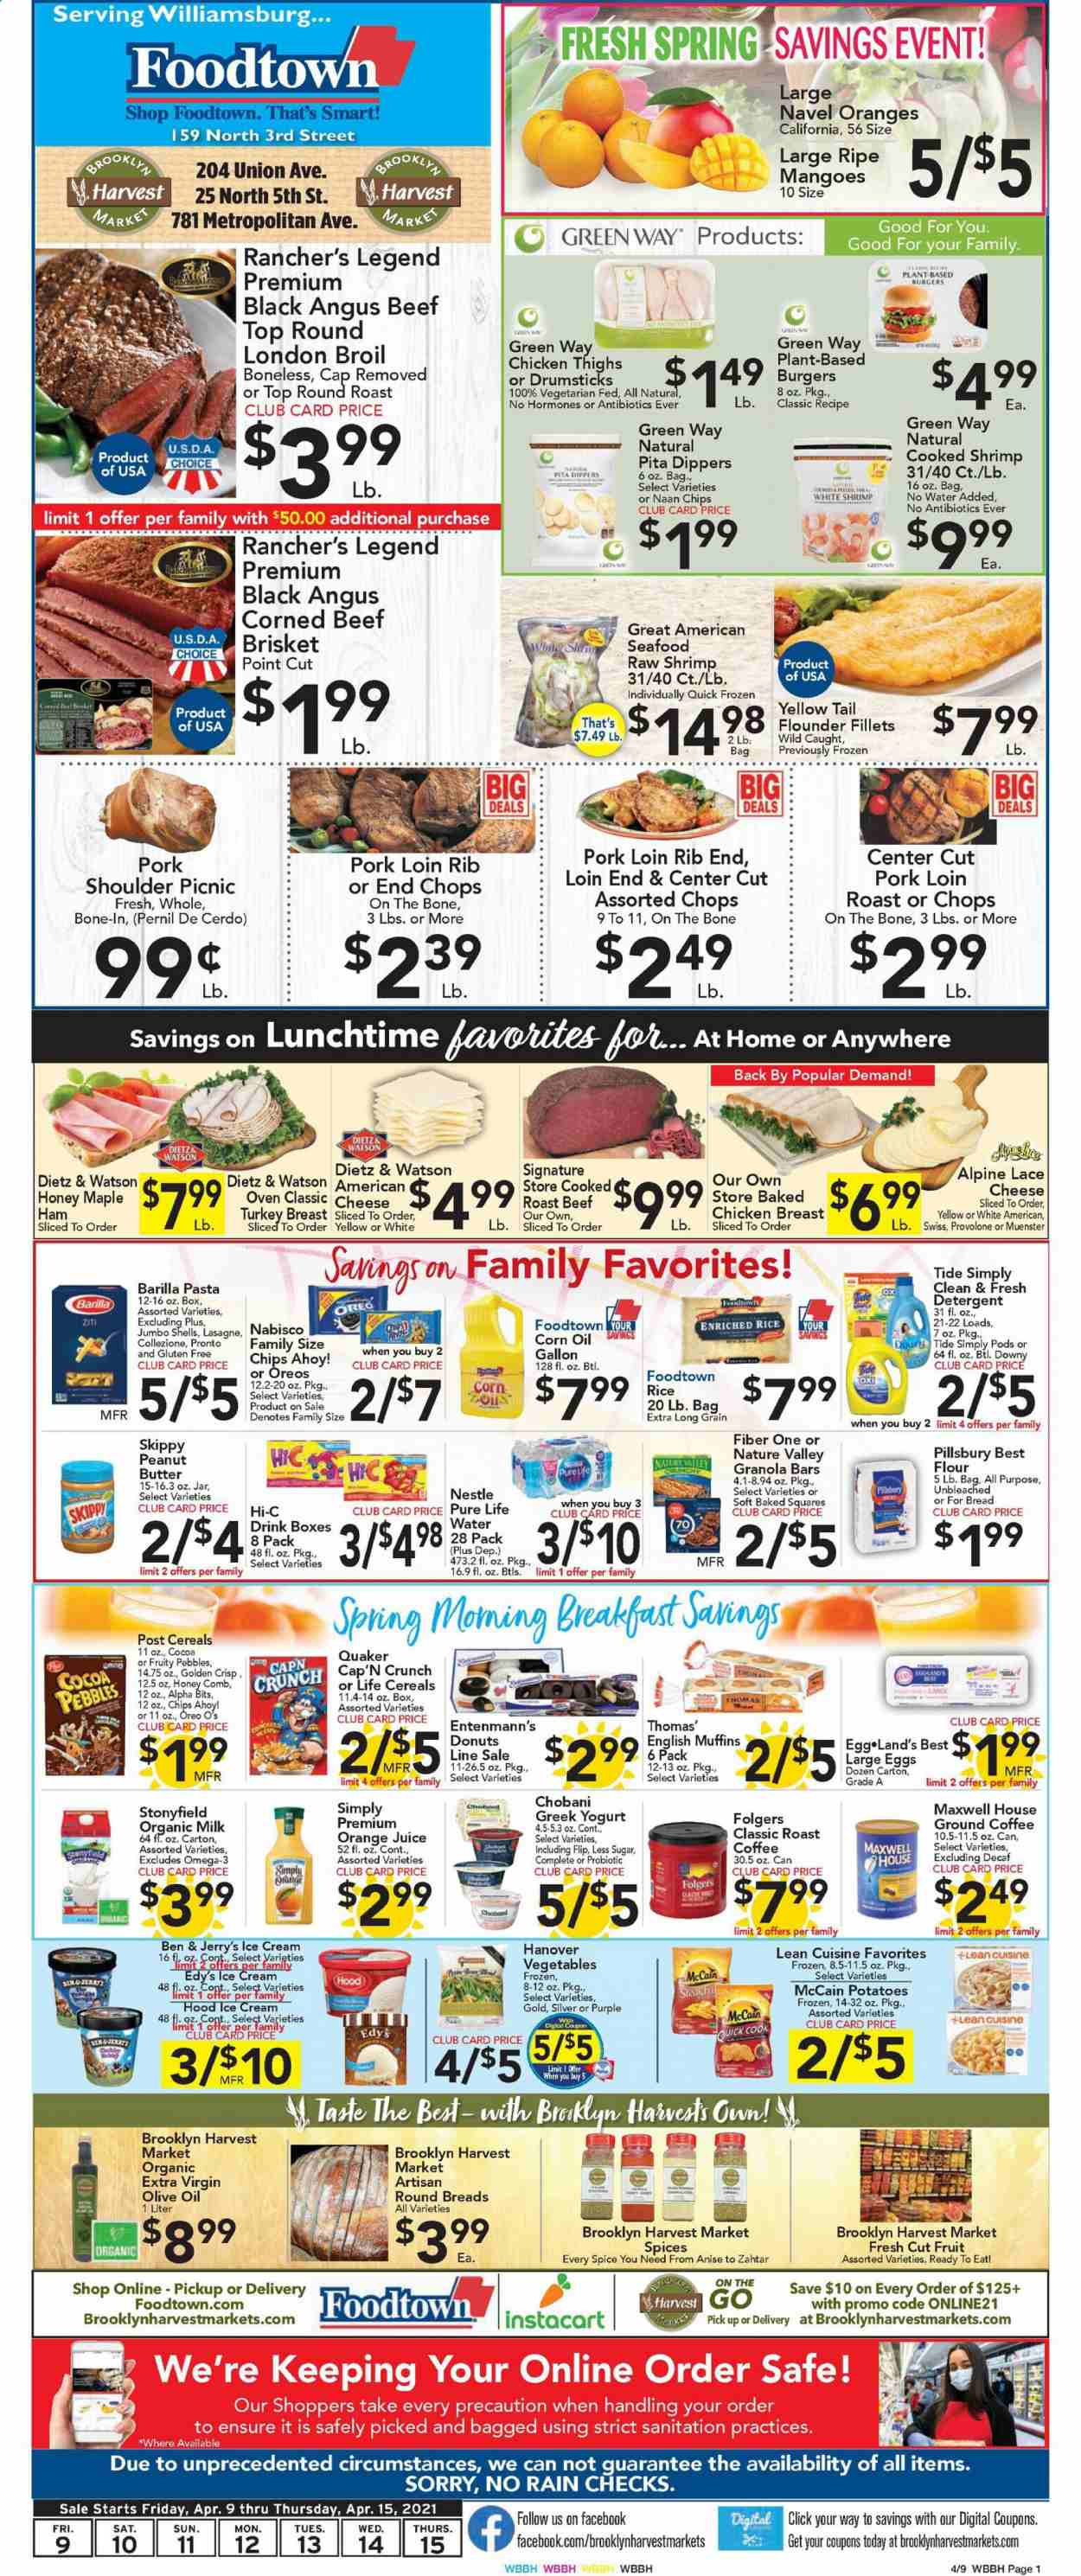 thumbnail - Foodtown Flyer - 04/09/2021 - 04/15/2021 - Sales products - bread, english muffins, pita, donut, Entenmann's, corn, potatoes, mango, flounder, seafood, shrimps, hamburger, Pillsbury, Barilla, Quaker, Lean Cuisine, ham, Dietz & Watson, corned beef, cheese, Münster cheese, greek yoghurt, Oreo, yoghurt, Chobani, organic milk, large eggs, ice cream, Ben & Jerry's, McCain, Nestlé, Chips Ahoy!, cocoa, flour, sugar, cereals, Cap'n Crunch, Nature Valley, Fiber One, rice, pasta, baked ziti, spice, corn oil, extra virgin olive oil, olive oil, honey, peanut butter, orange juice, juice, Hi-c, Pure Life Water, Maxwell House, coffee, Folgers, ground coffee, turkey breast, chicken thighs, beef meat, round roast, roast beef, beef brisket, pork loin, pork meat, pork shoulder, detergent, Tide, comb, Omega-3, navel oranges. Page 1.